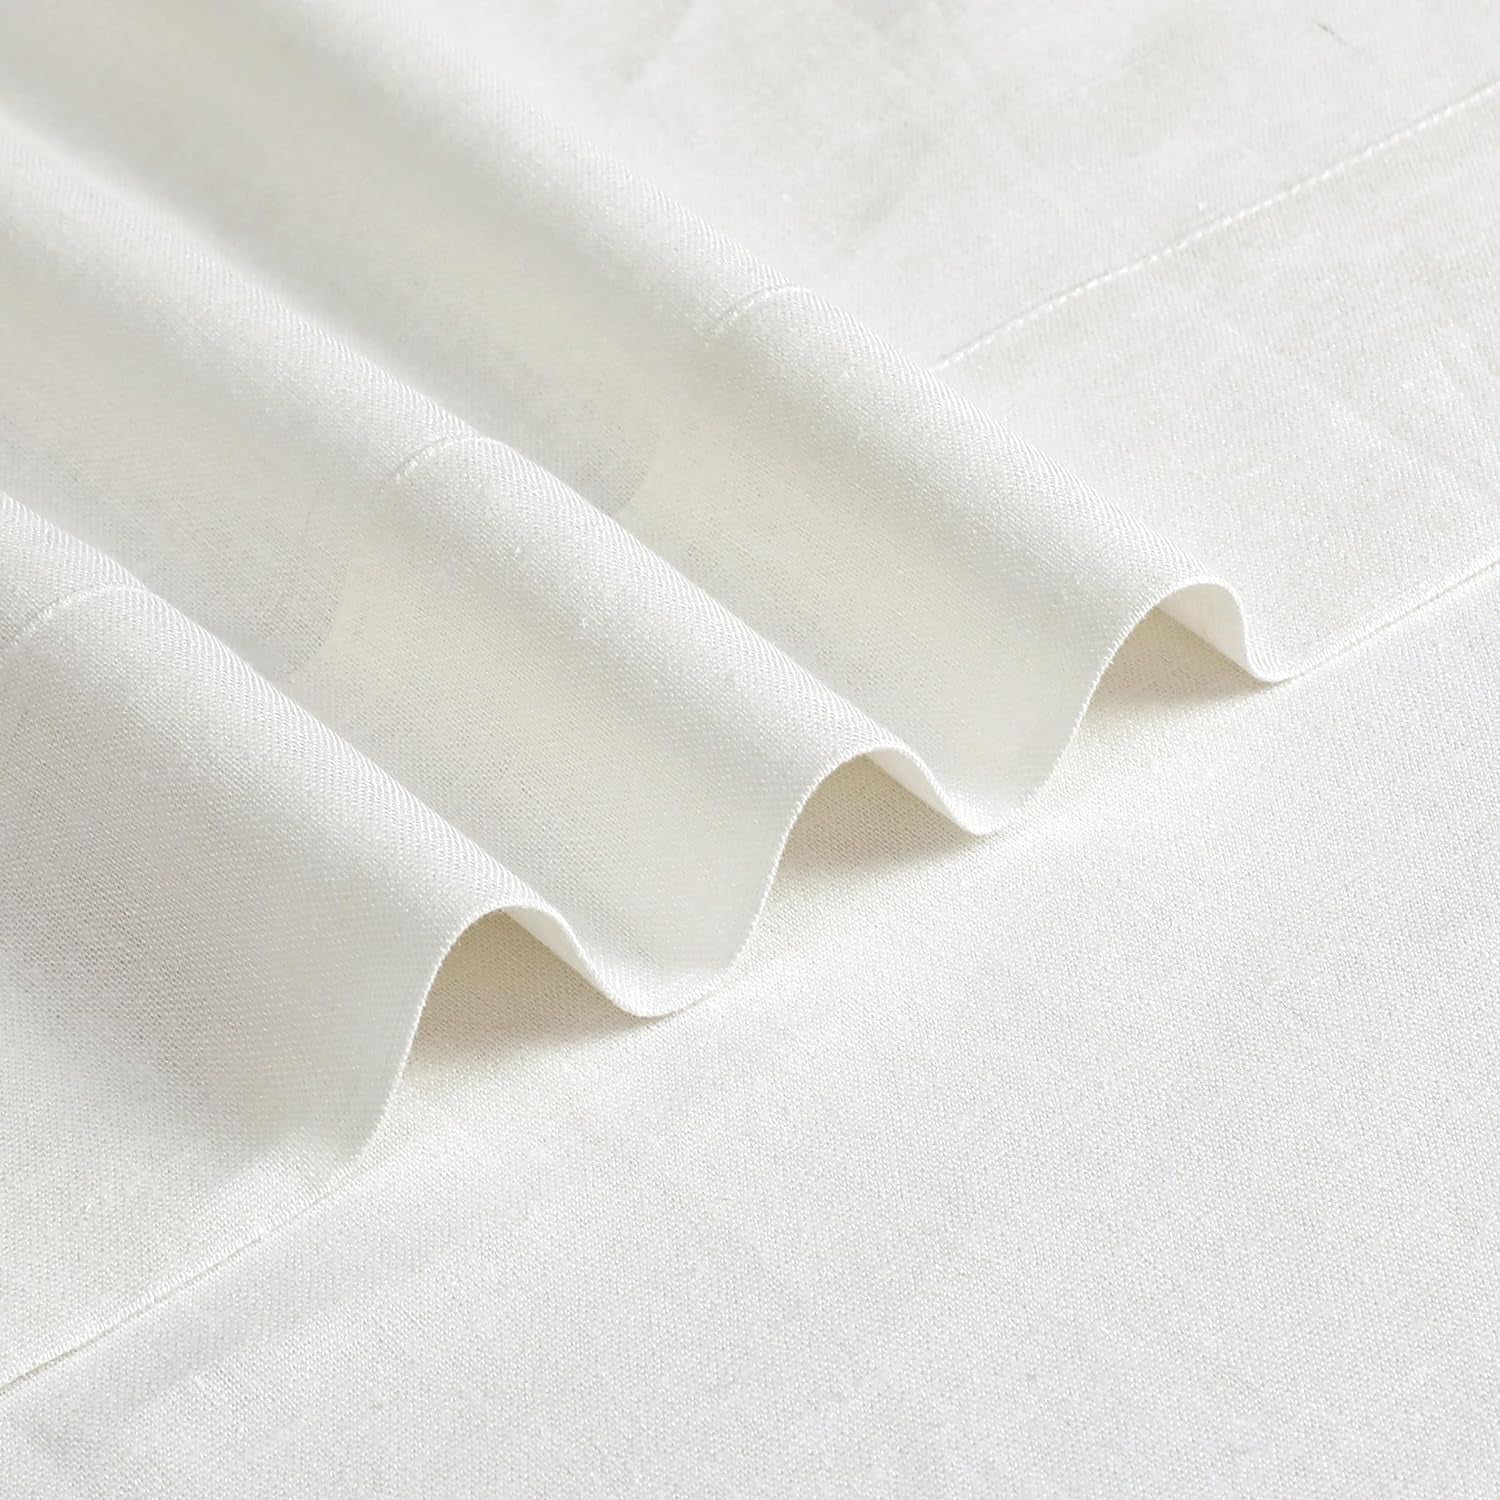 White Pinch Pleated Curtain Semi Sheer Curtain Panel Linen Cotton Blend Decorative Drape 84 Inches Long for Living Room Bedroom Farmhouse Rustic Window Treatment, White, 34"X84"X2  Central Park   